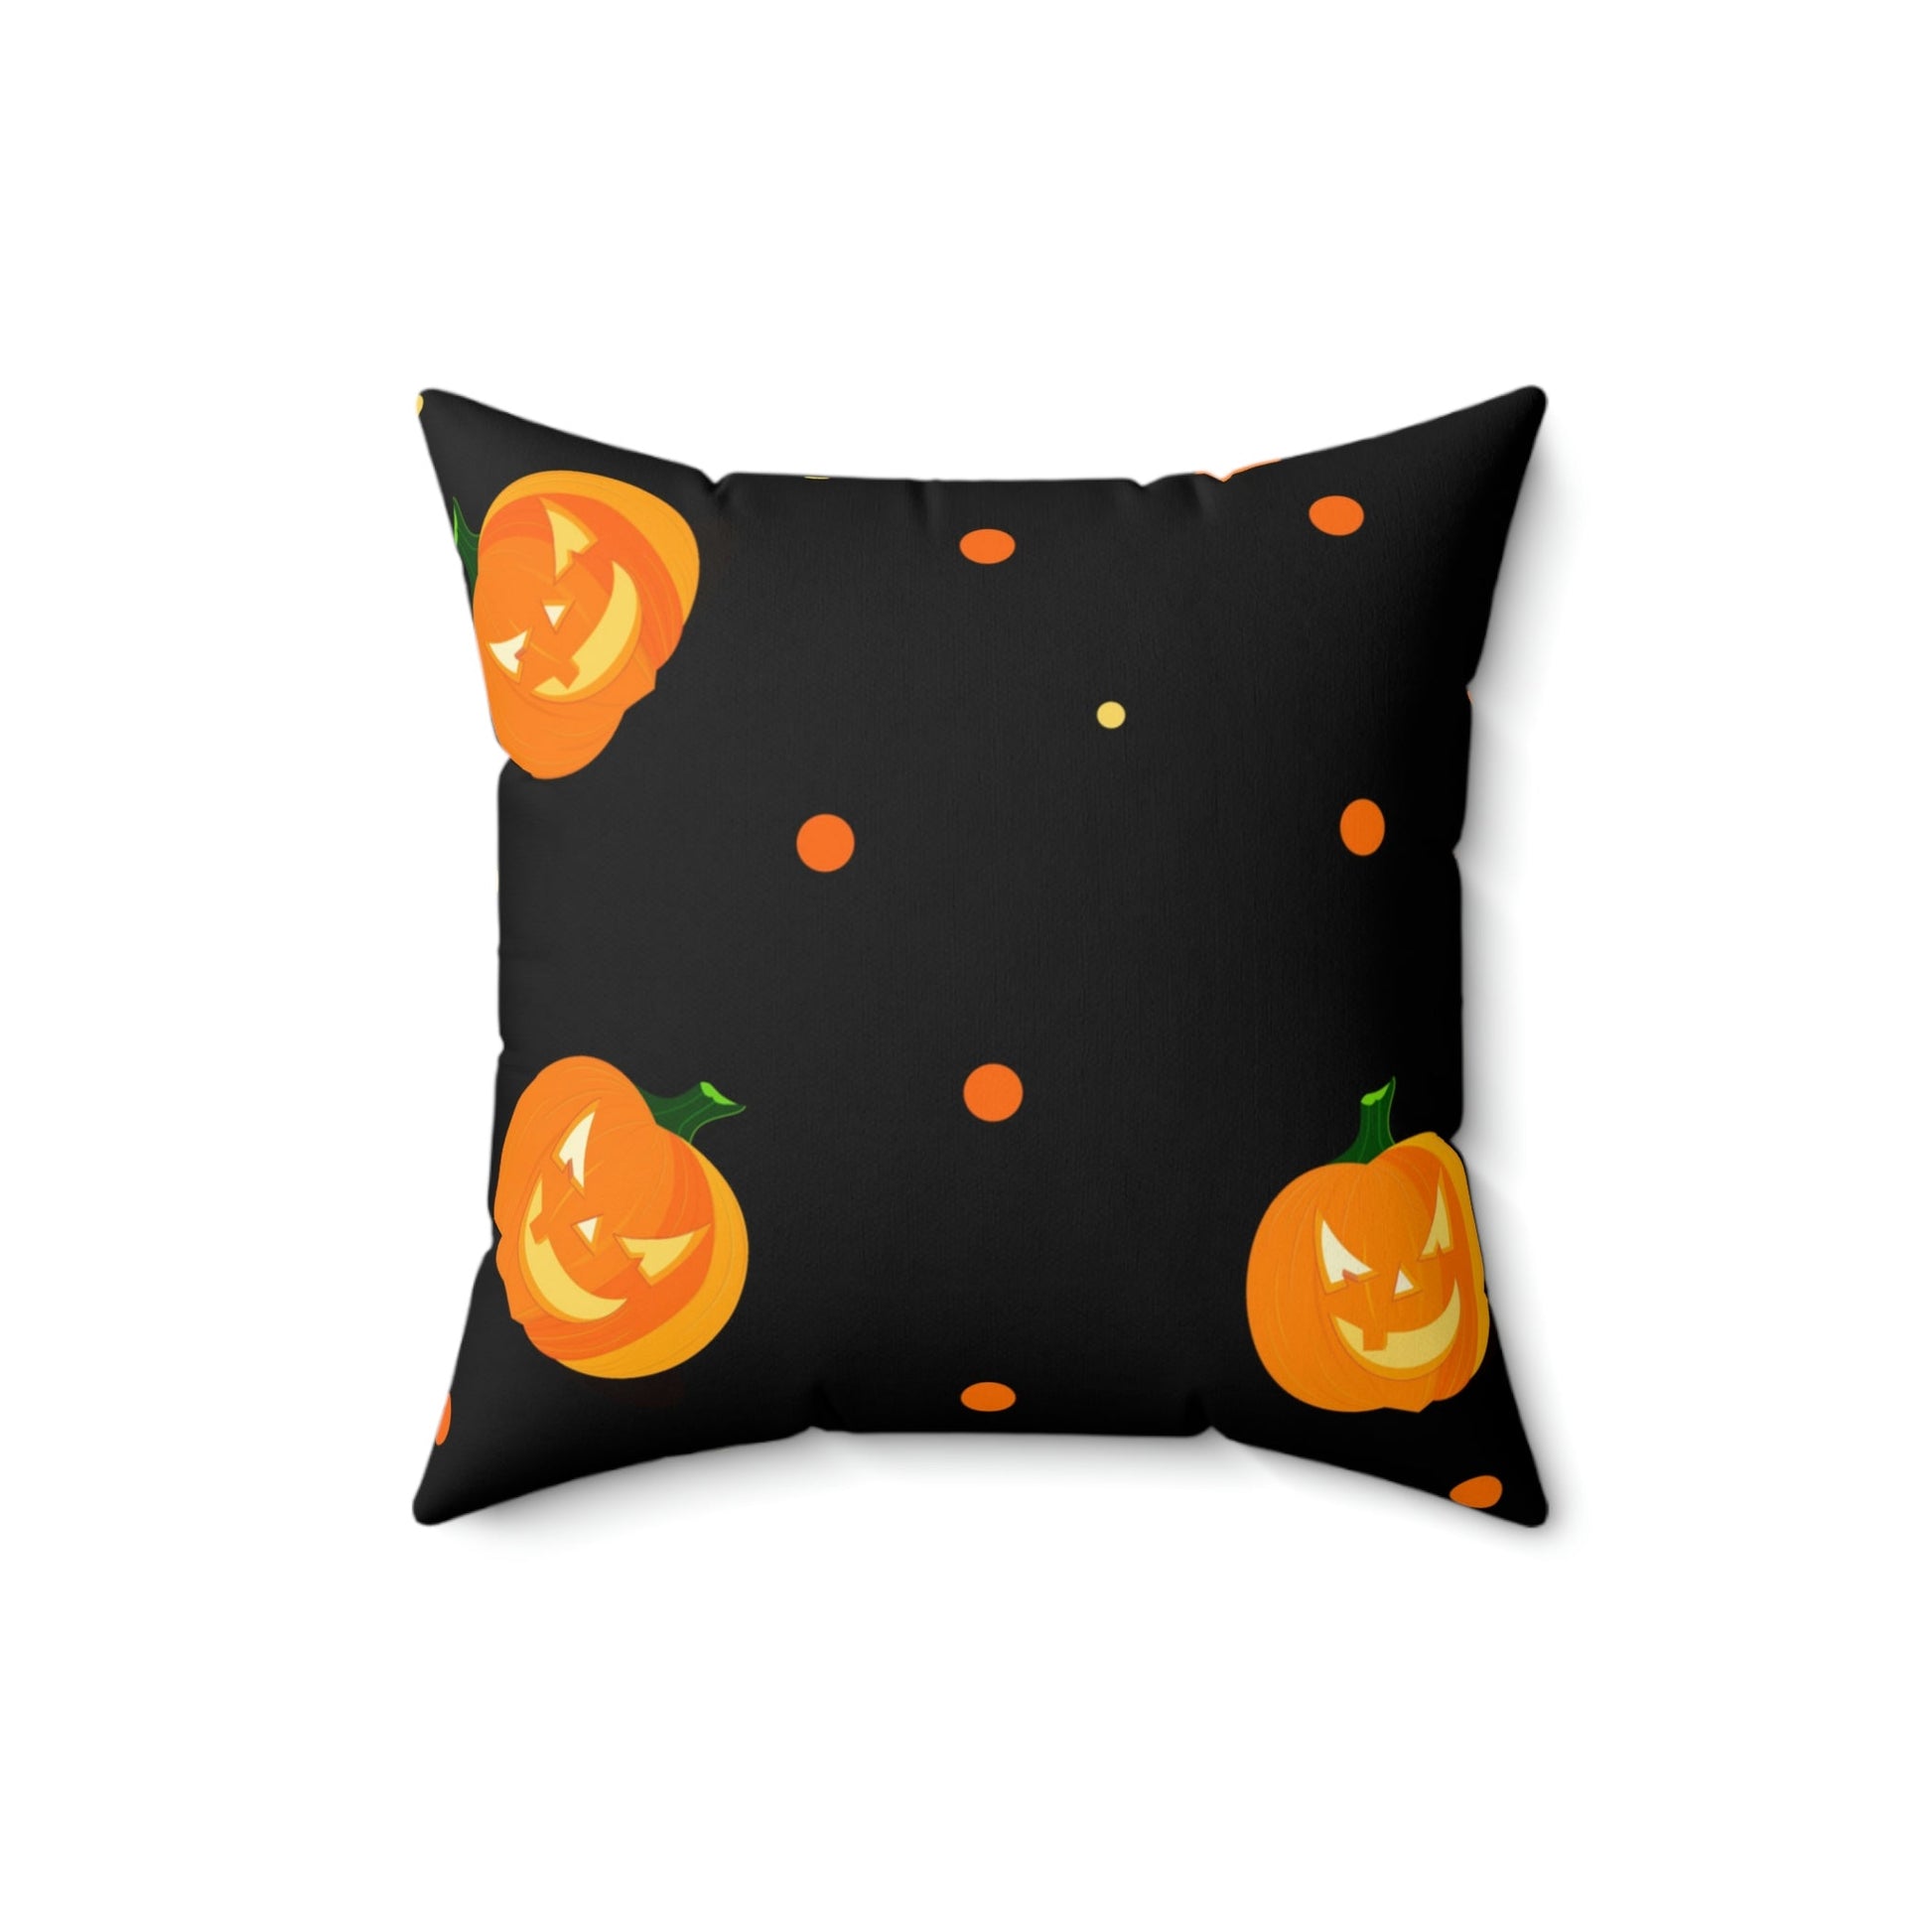 Spooky Pumpkins After Dark Square Pillow Home Decor Pink Sweetheart